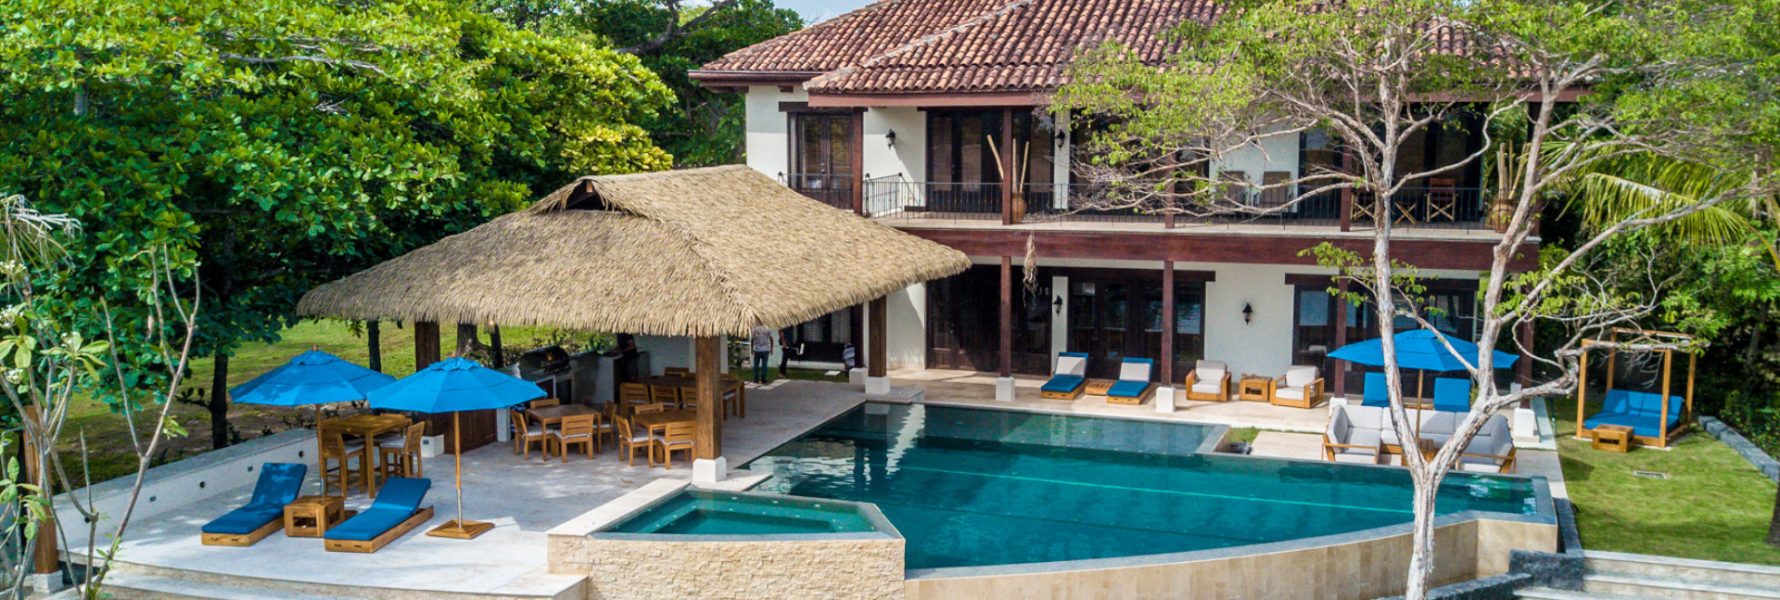 This beautiful vacation home located in Tamarindo Costa Rica has a large pool to swim in.